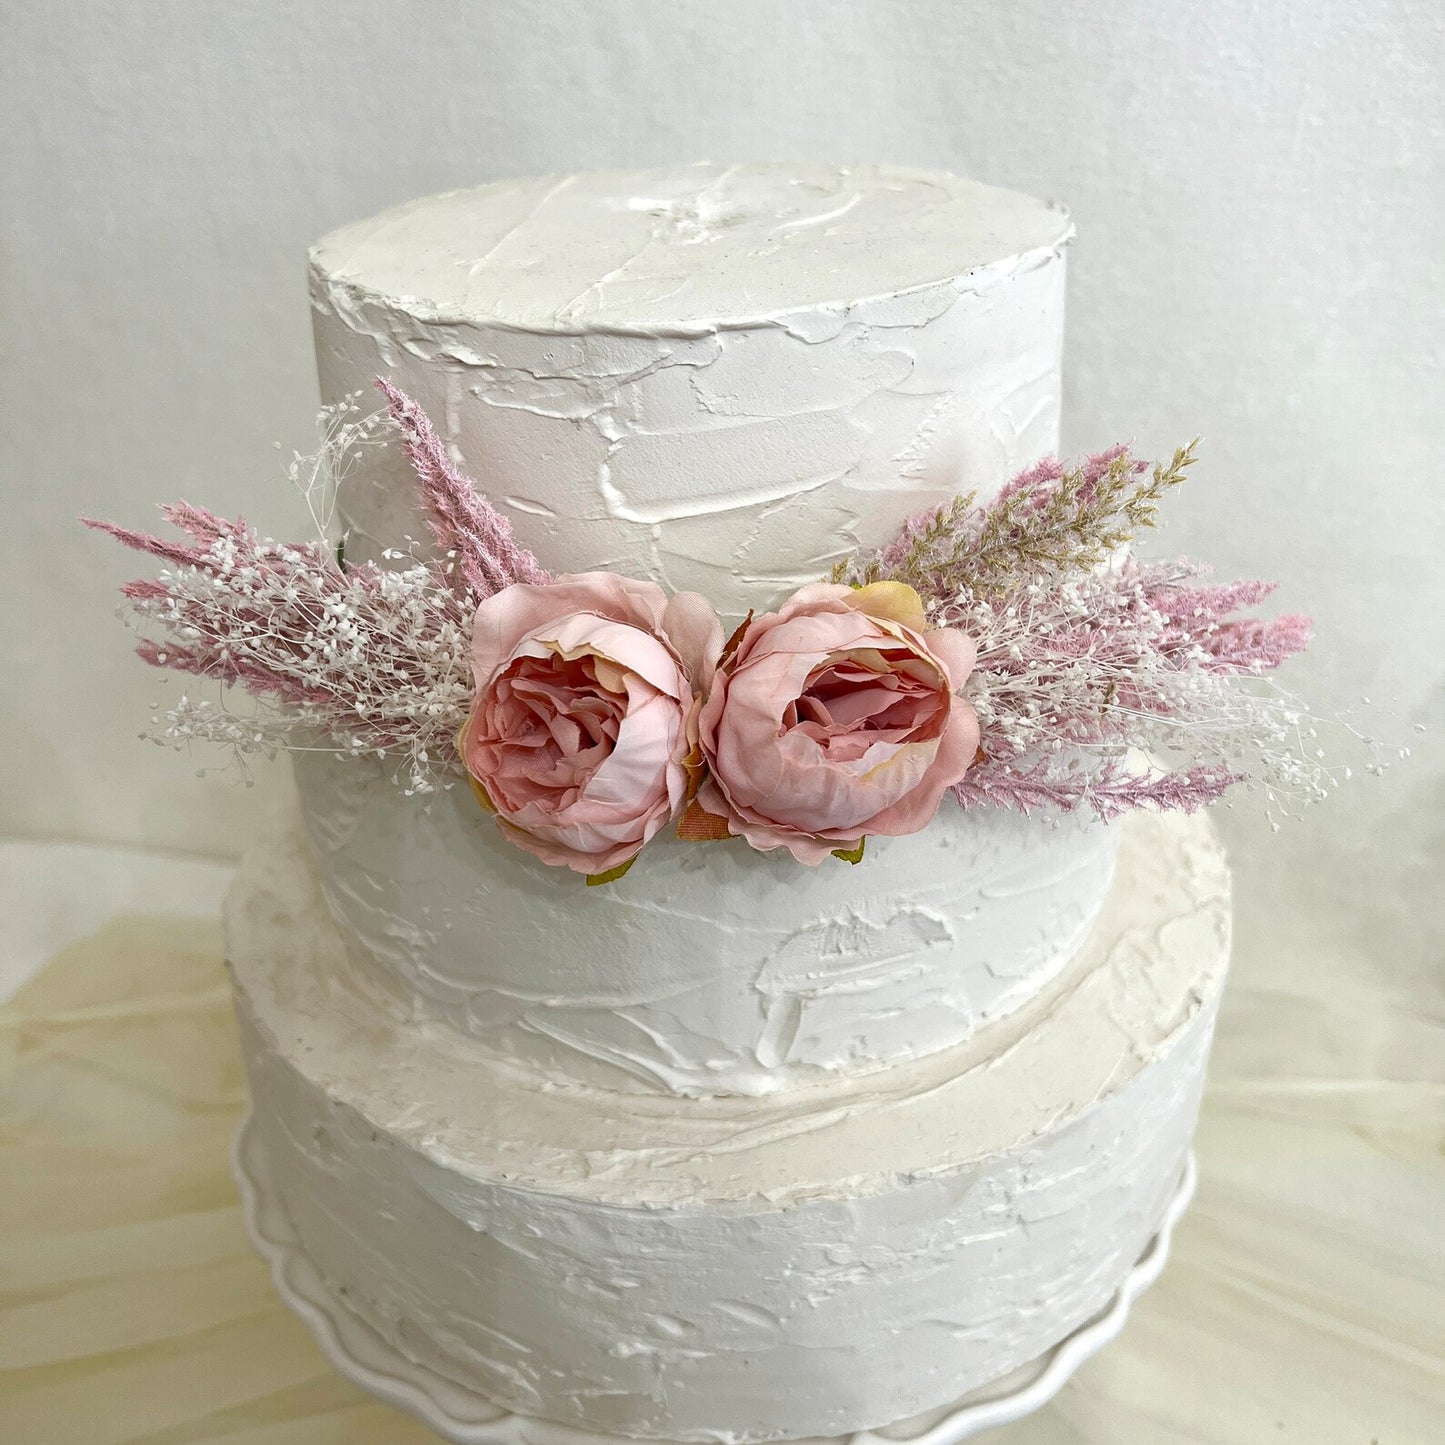 Silk and Dried Flowers Cake Side Decor - Blush or Cream